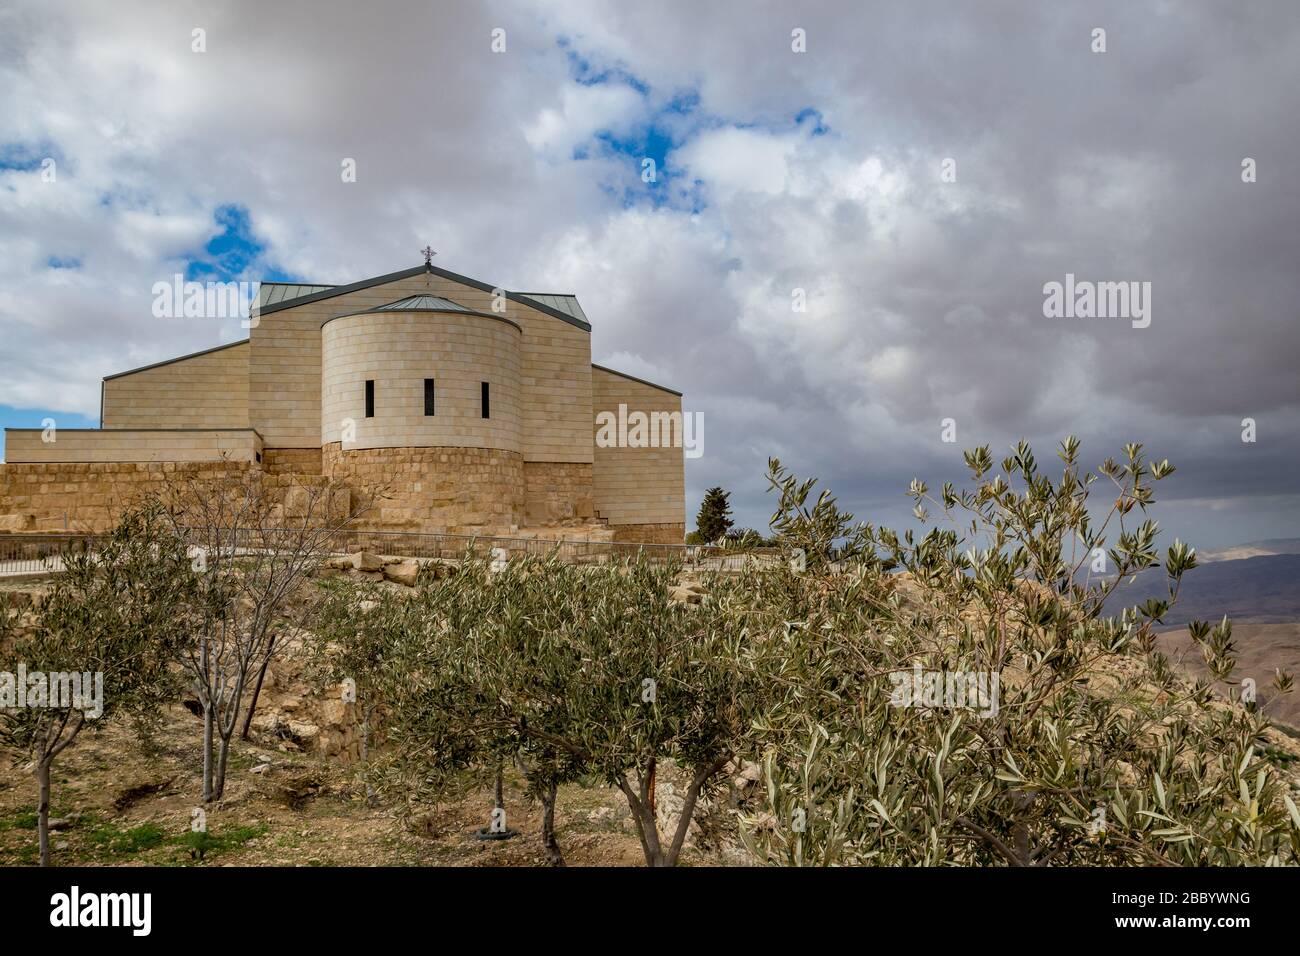 Memorial Basilica of Moses, Mount Nebo, Kingdom of Jordan, cloudy impressive sky winter afternoon. Olive trees in the foreground, performance of Nature and Architecture Stock Photo